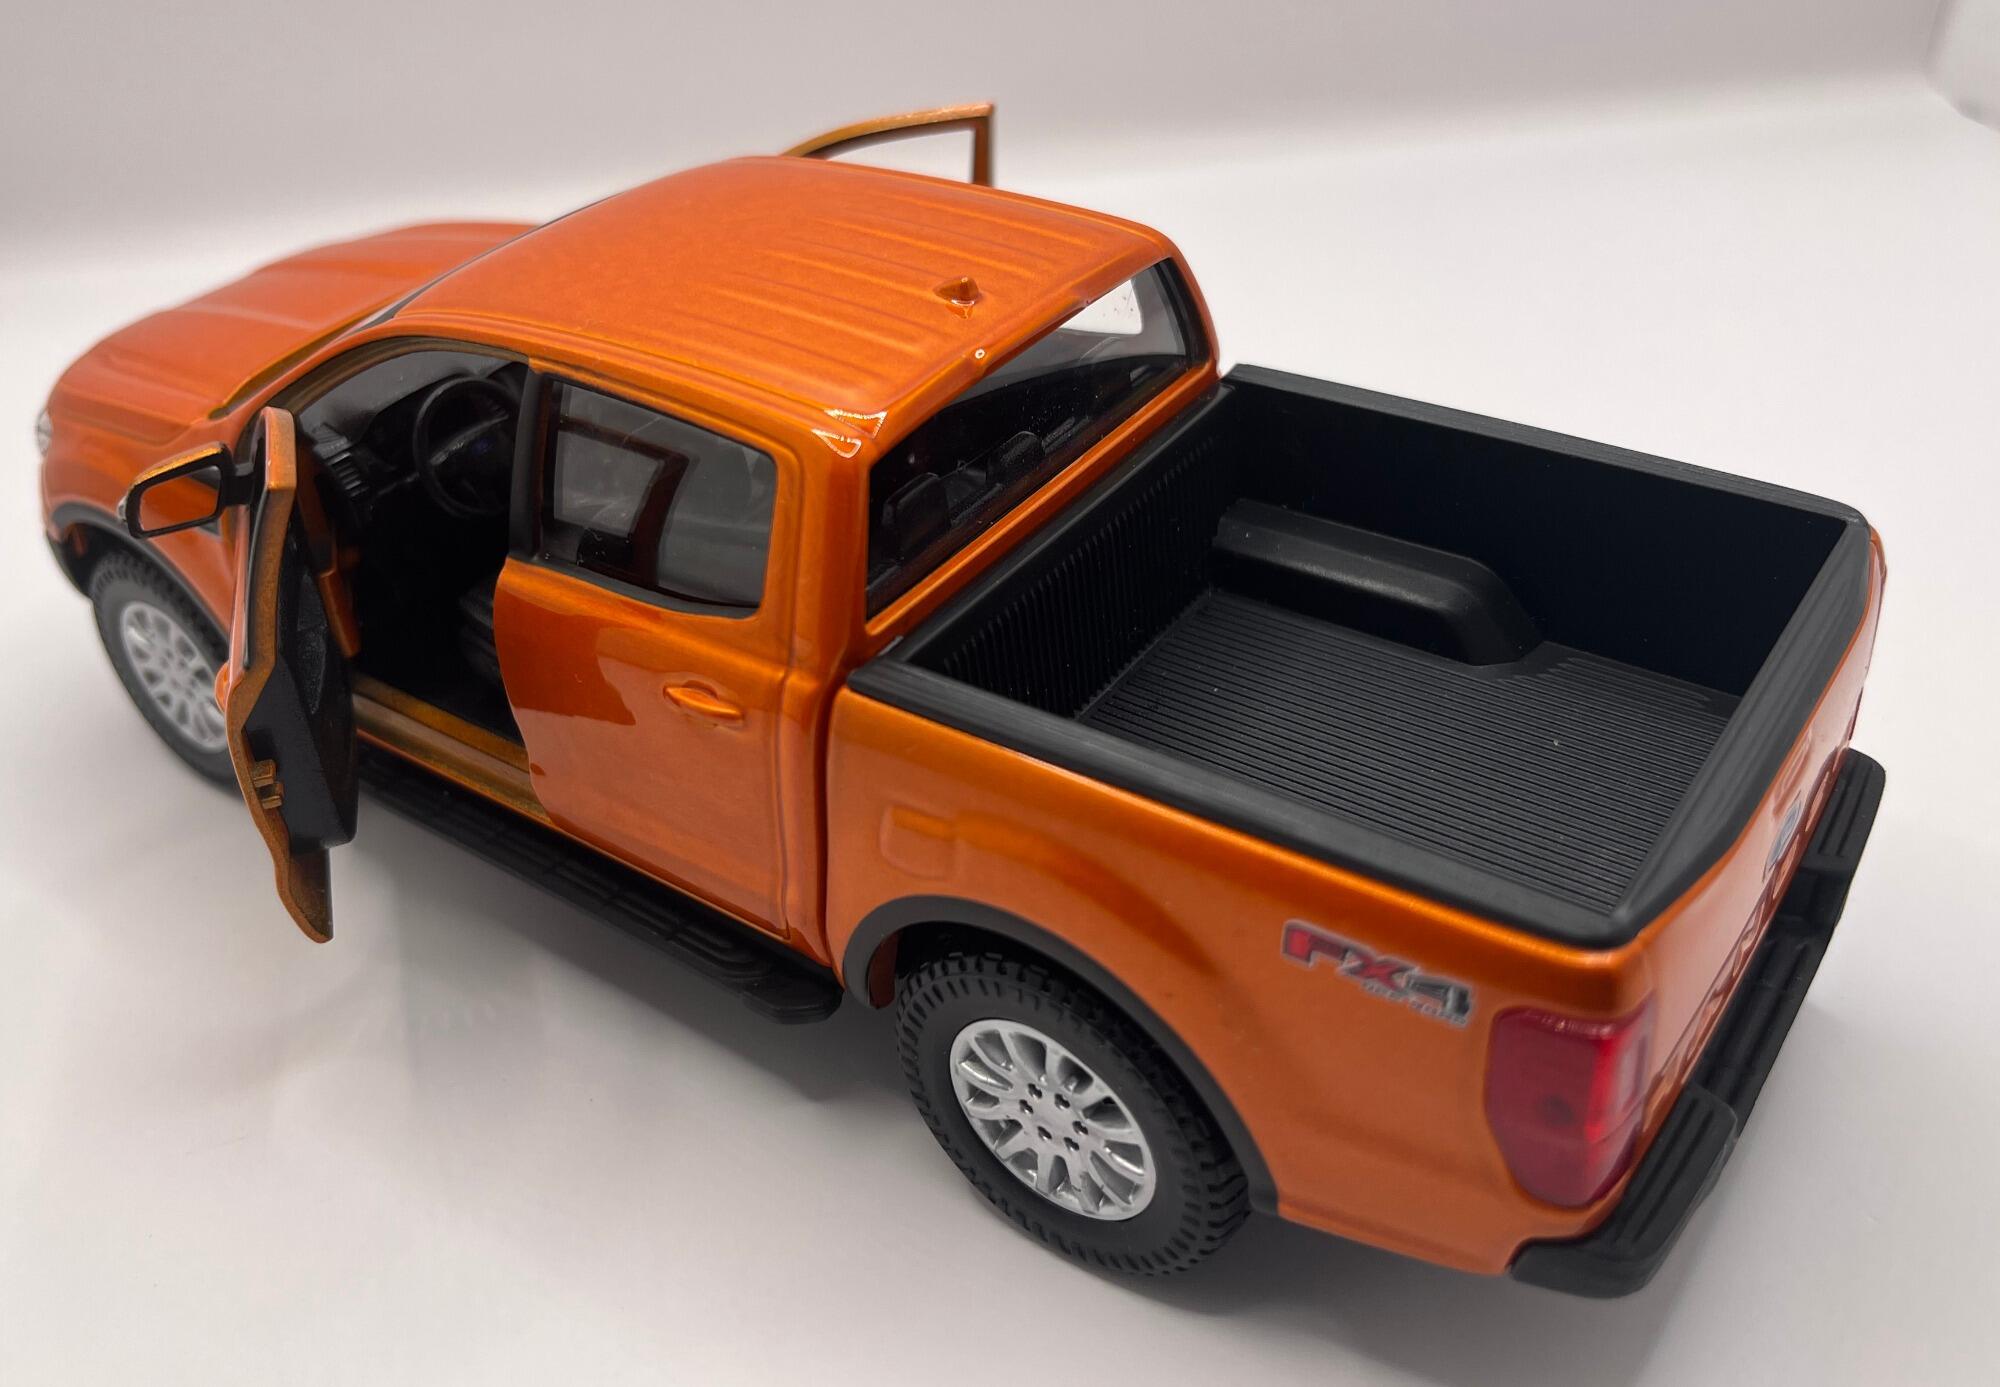 videos of diecast models for pickup trucks and crew cab models